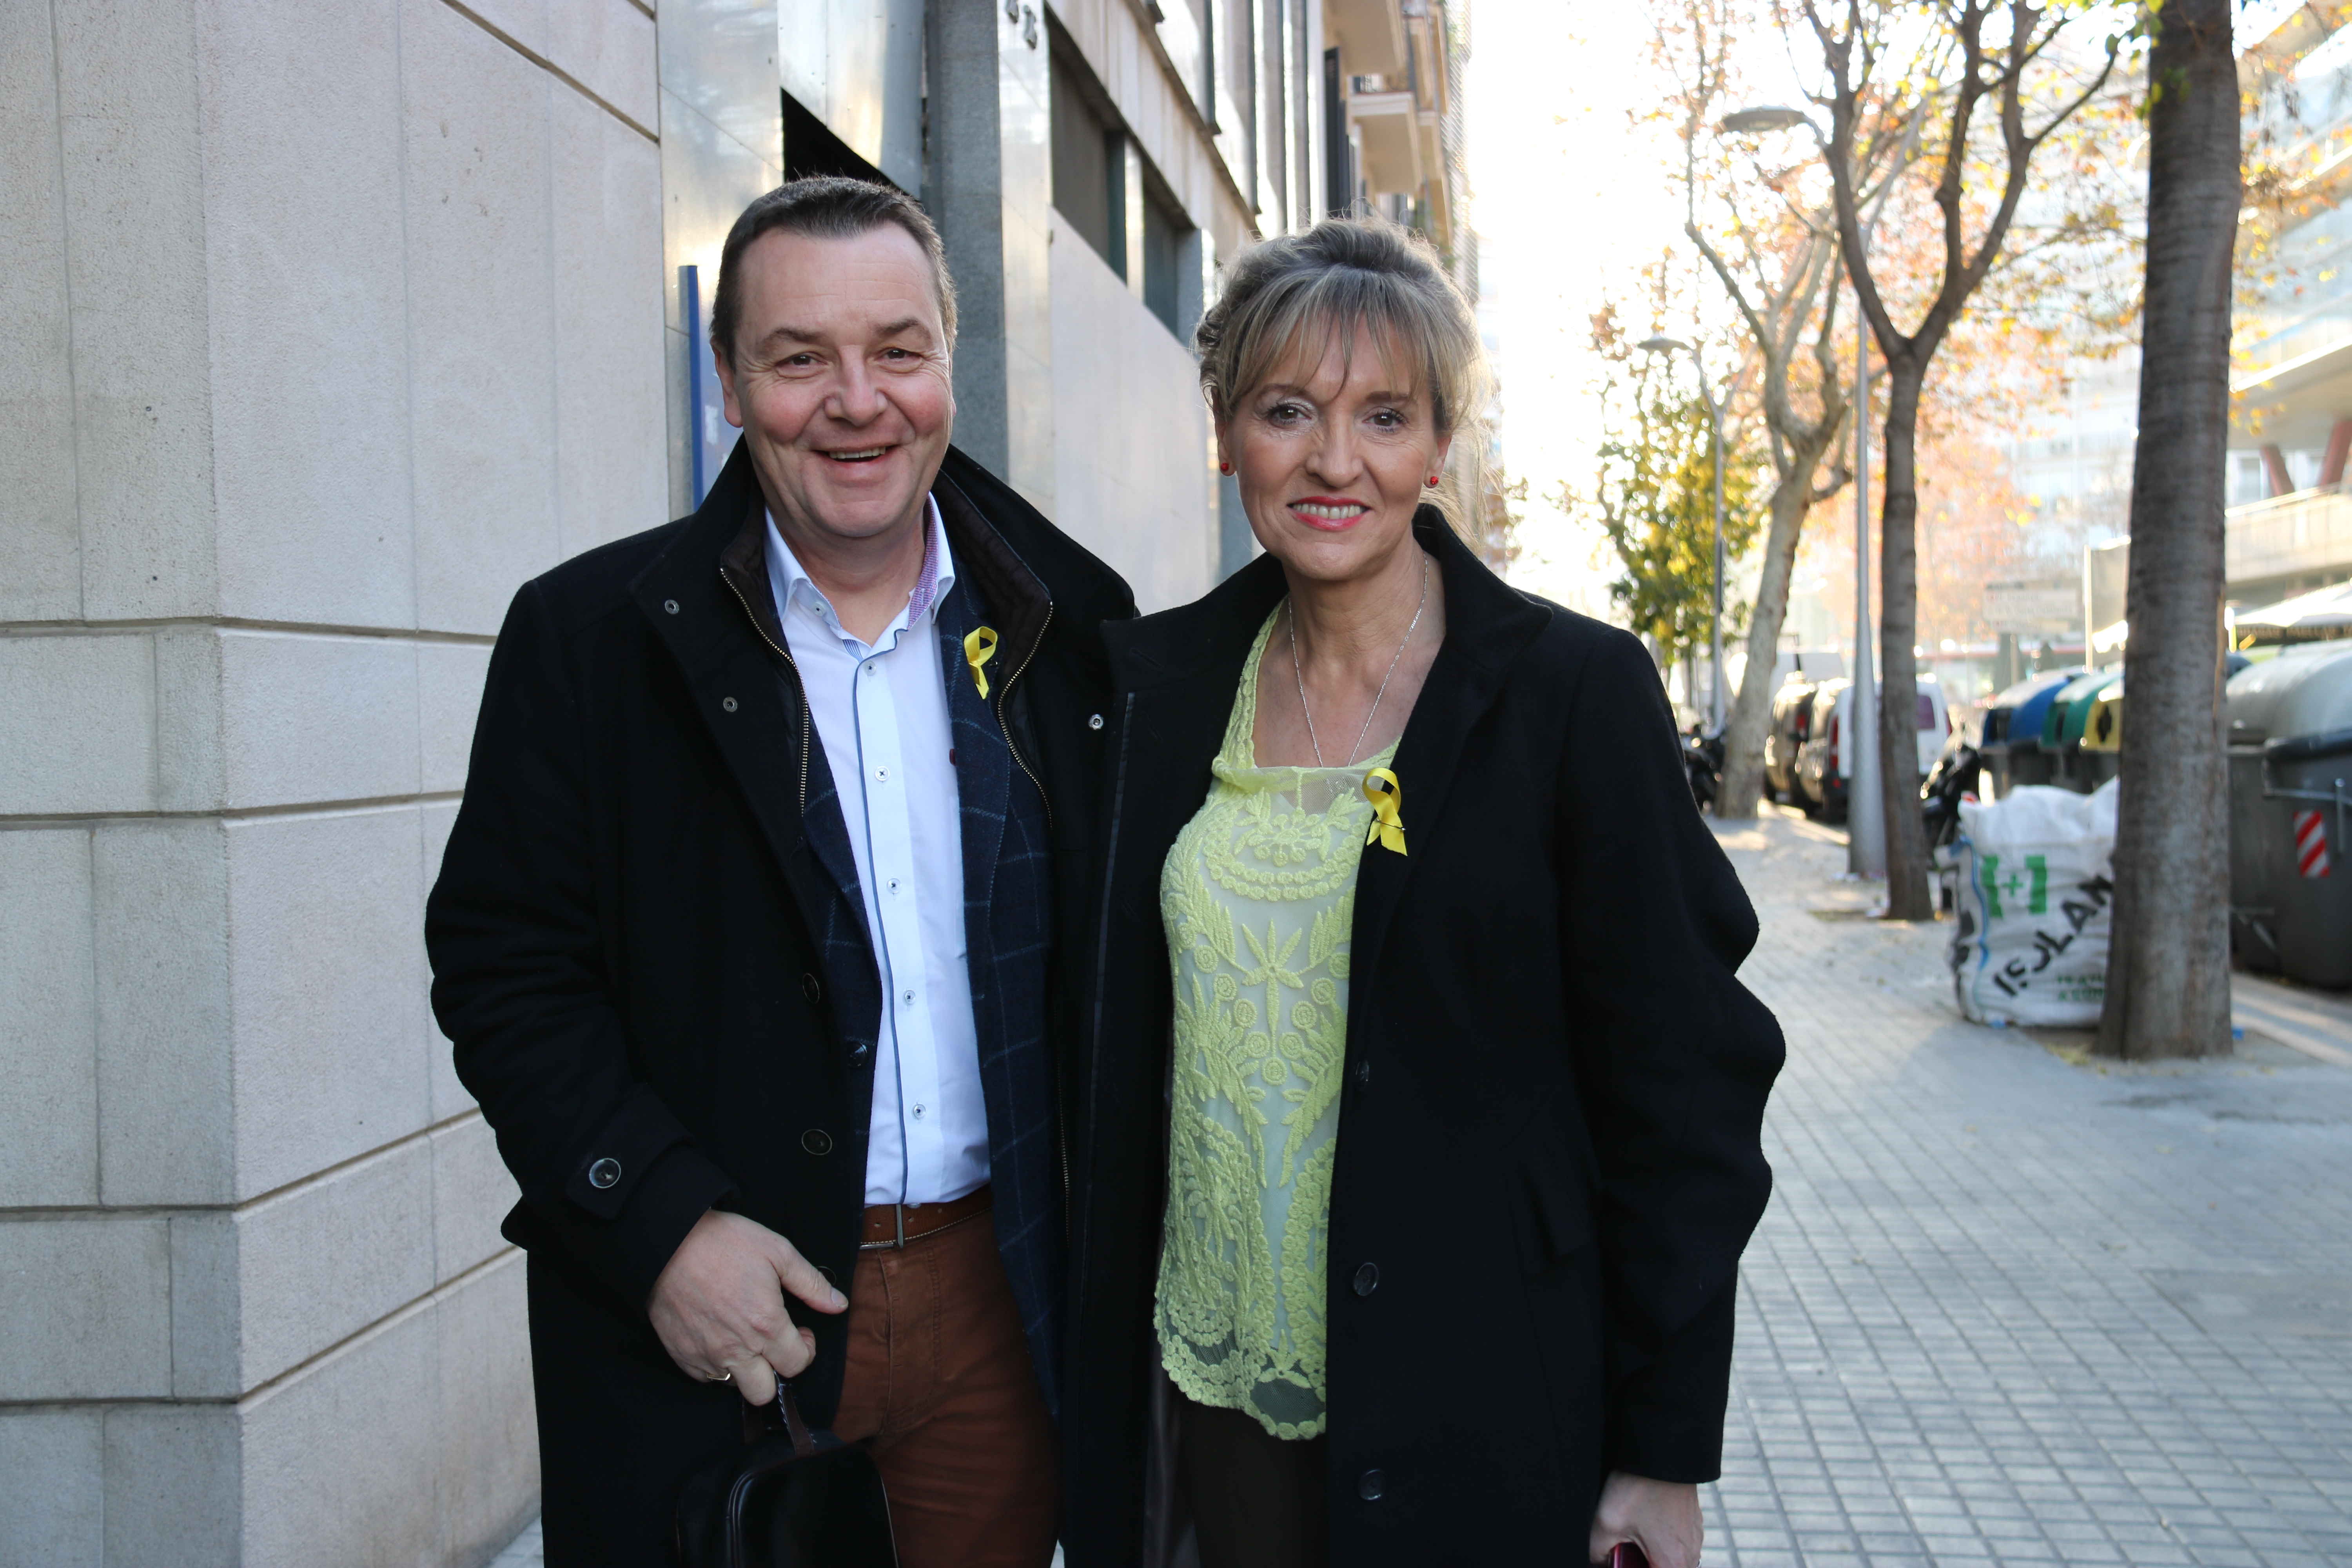 MEPs Mark Demesmaeker and Martina Anderson (by ACN)